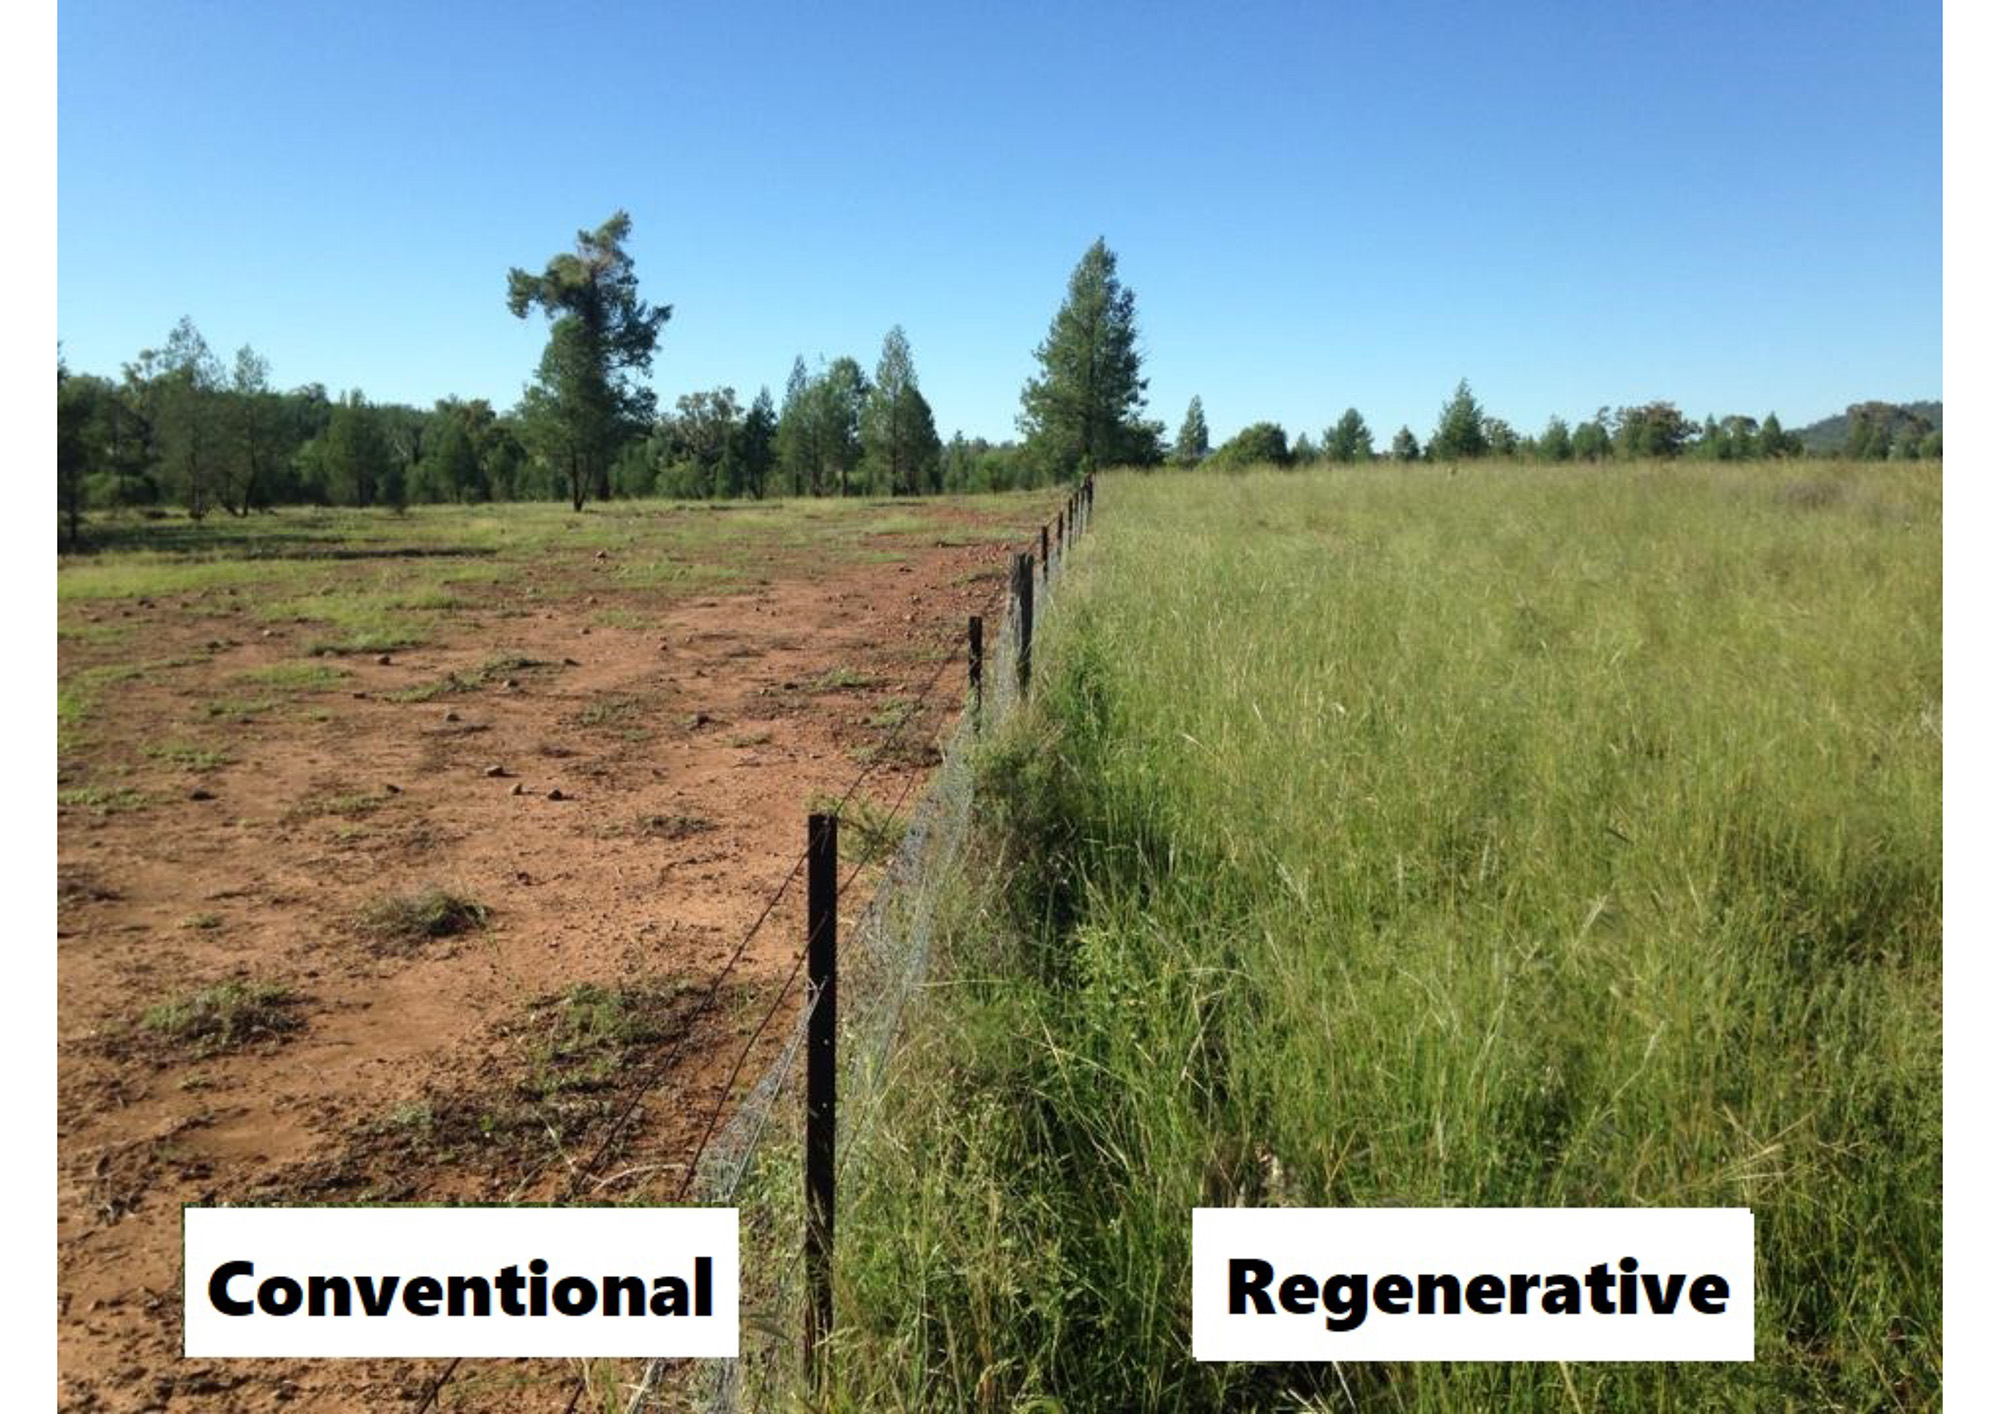  REGENERATIVE AGRICULTURE and RECOVERING FROM FIRE